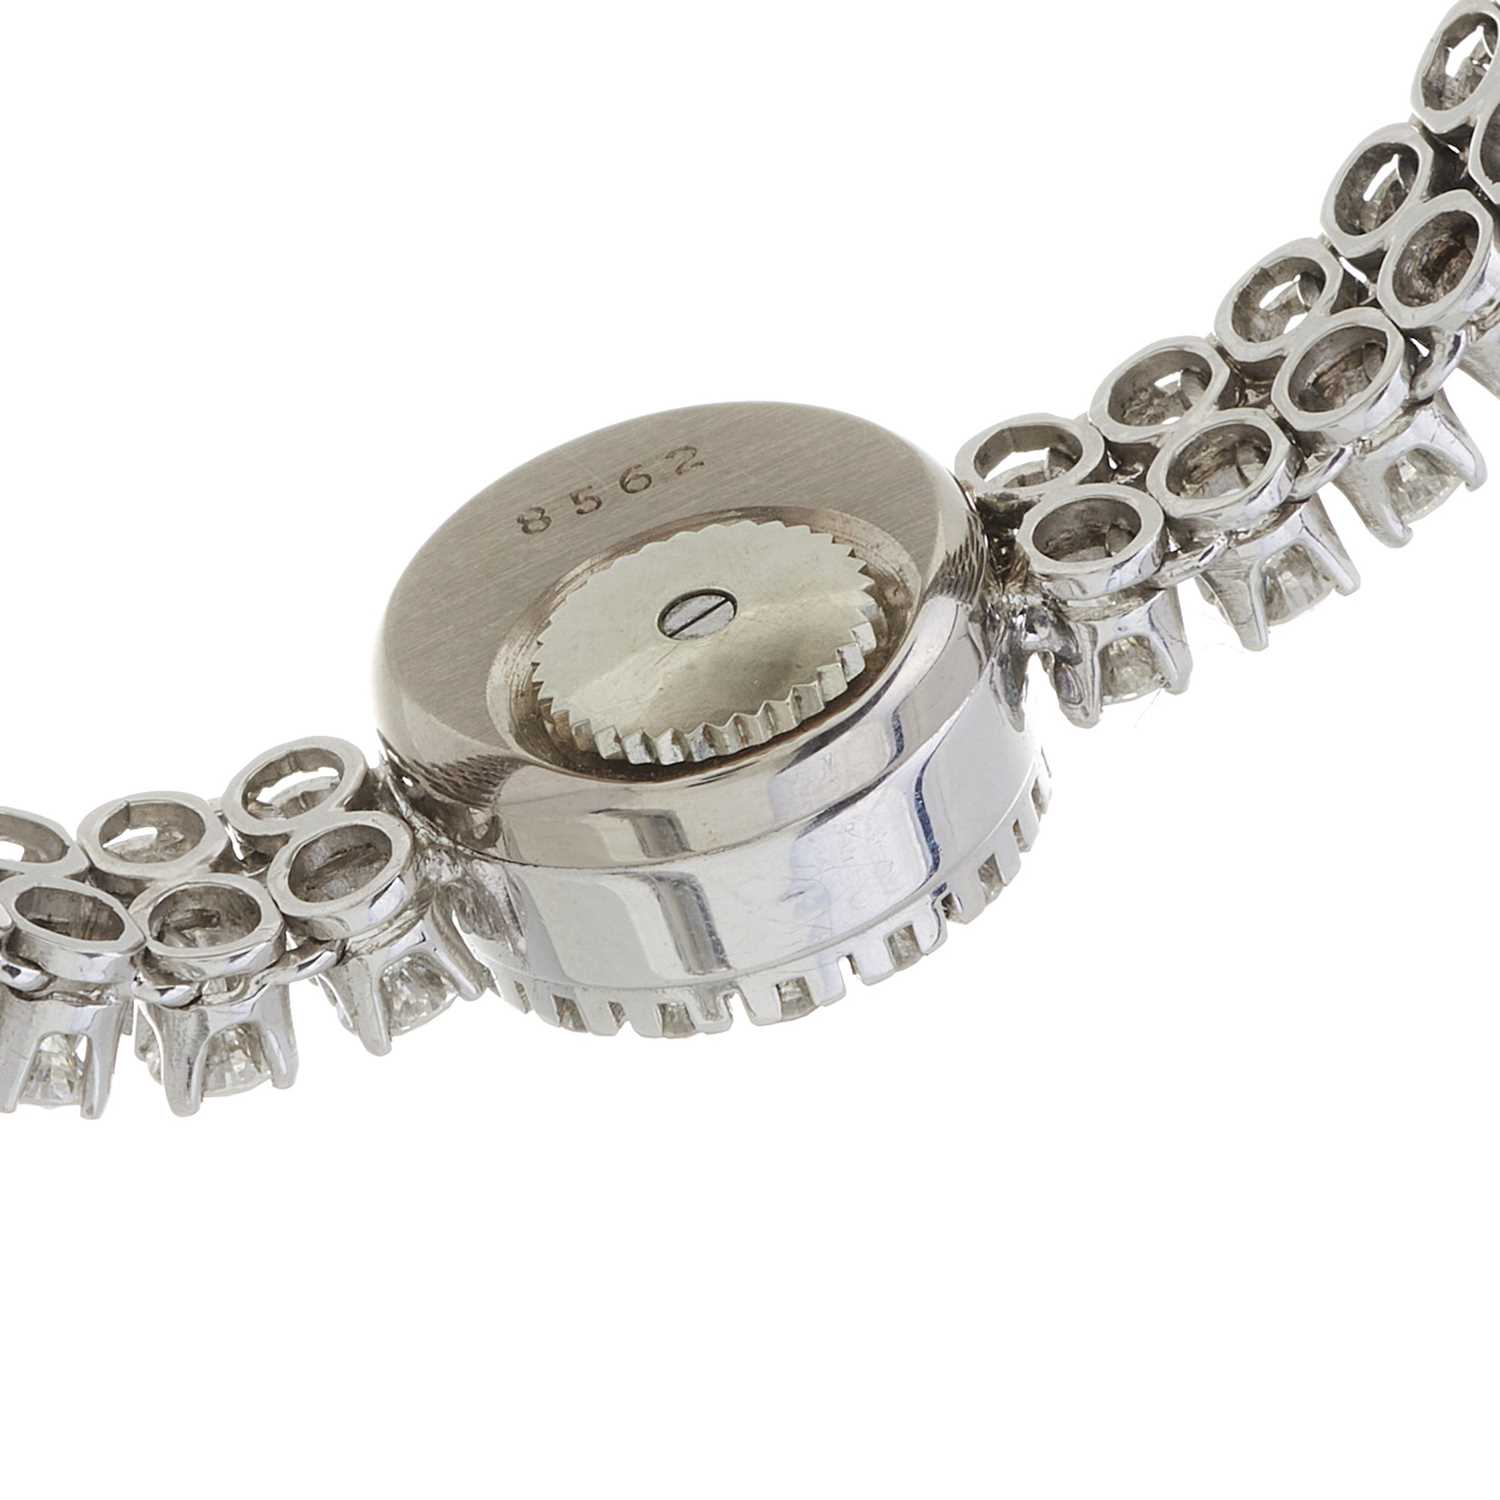 Blancpain, a mid 20th century 18ct gold diamond cocktail bracelet watch - Image 3 of 3